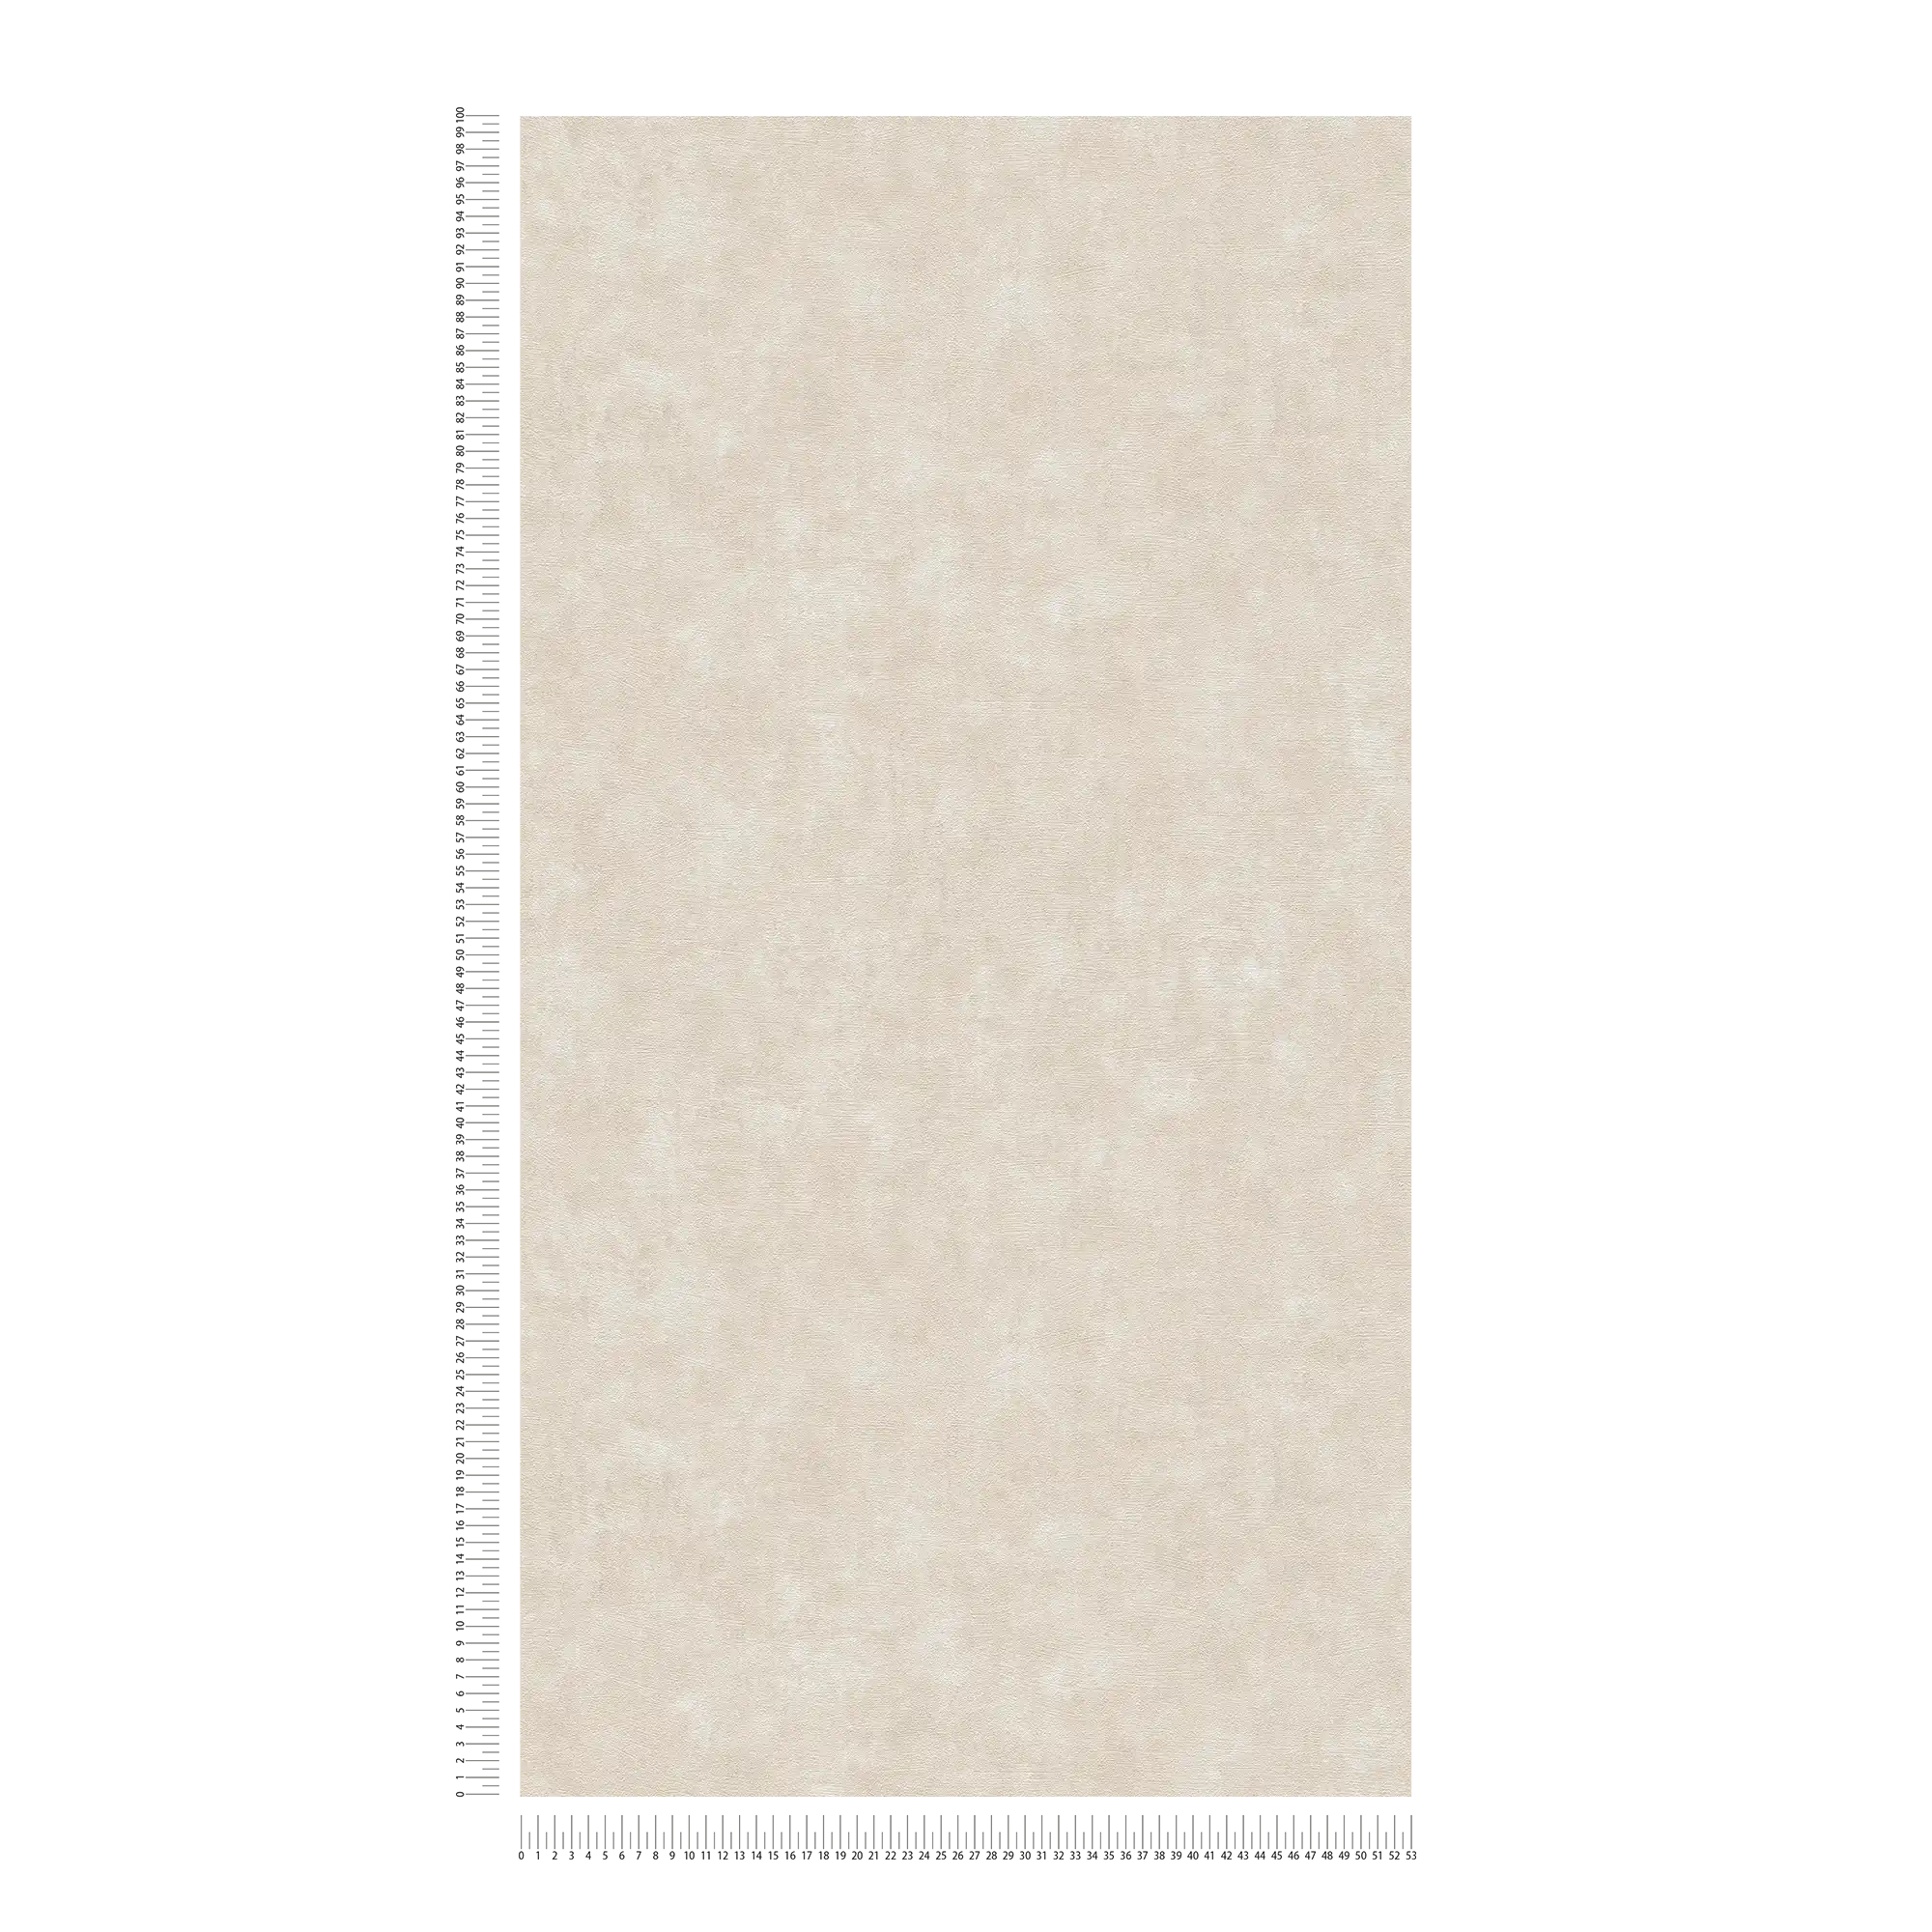             Non-woven wallpaper plains with concrete look and structure - cream, grey
        